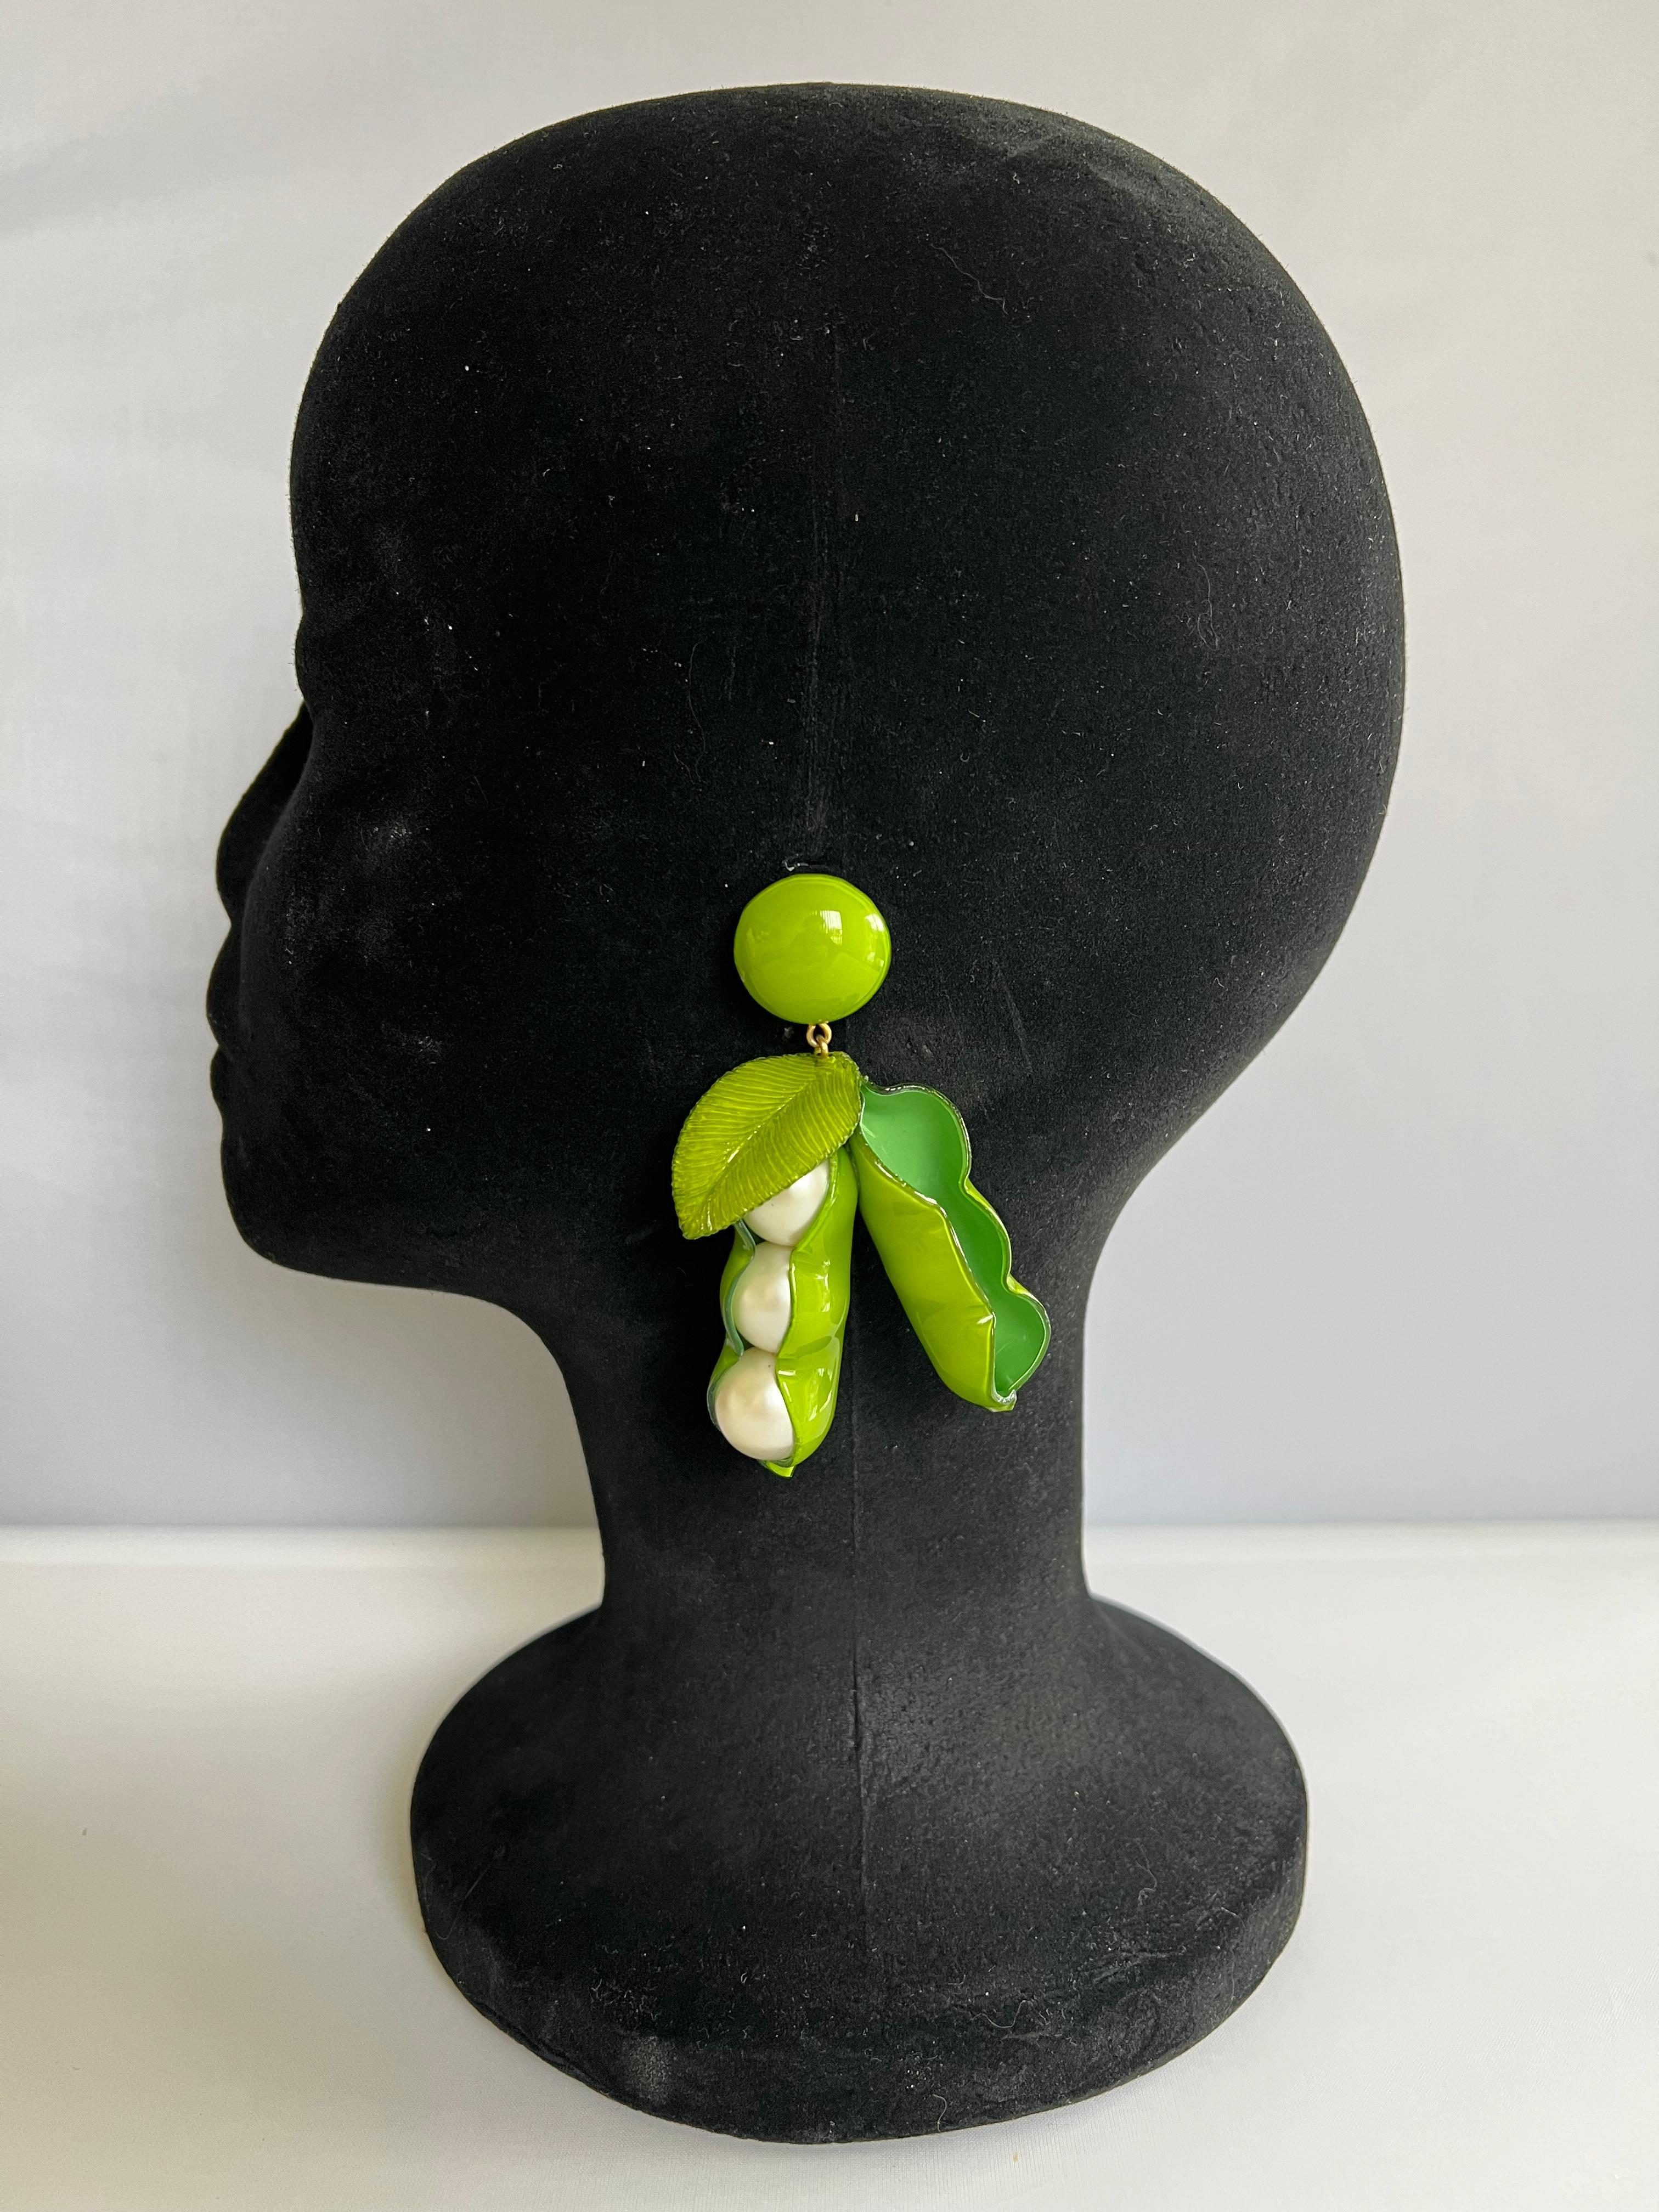 Light and easy to wear, this handmade artisanal pair of earrings was made in Paris by Cilea. The earrings feature two large whimsical peas in a pod of enameline (enamel and resin composite) with faux pearl center details. A unique, well-crafted